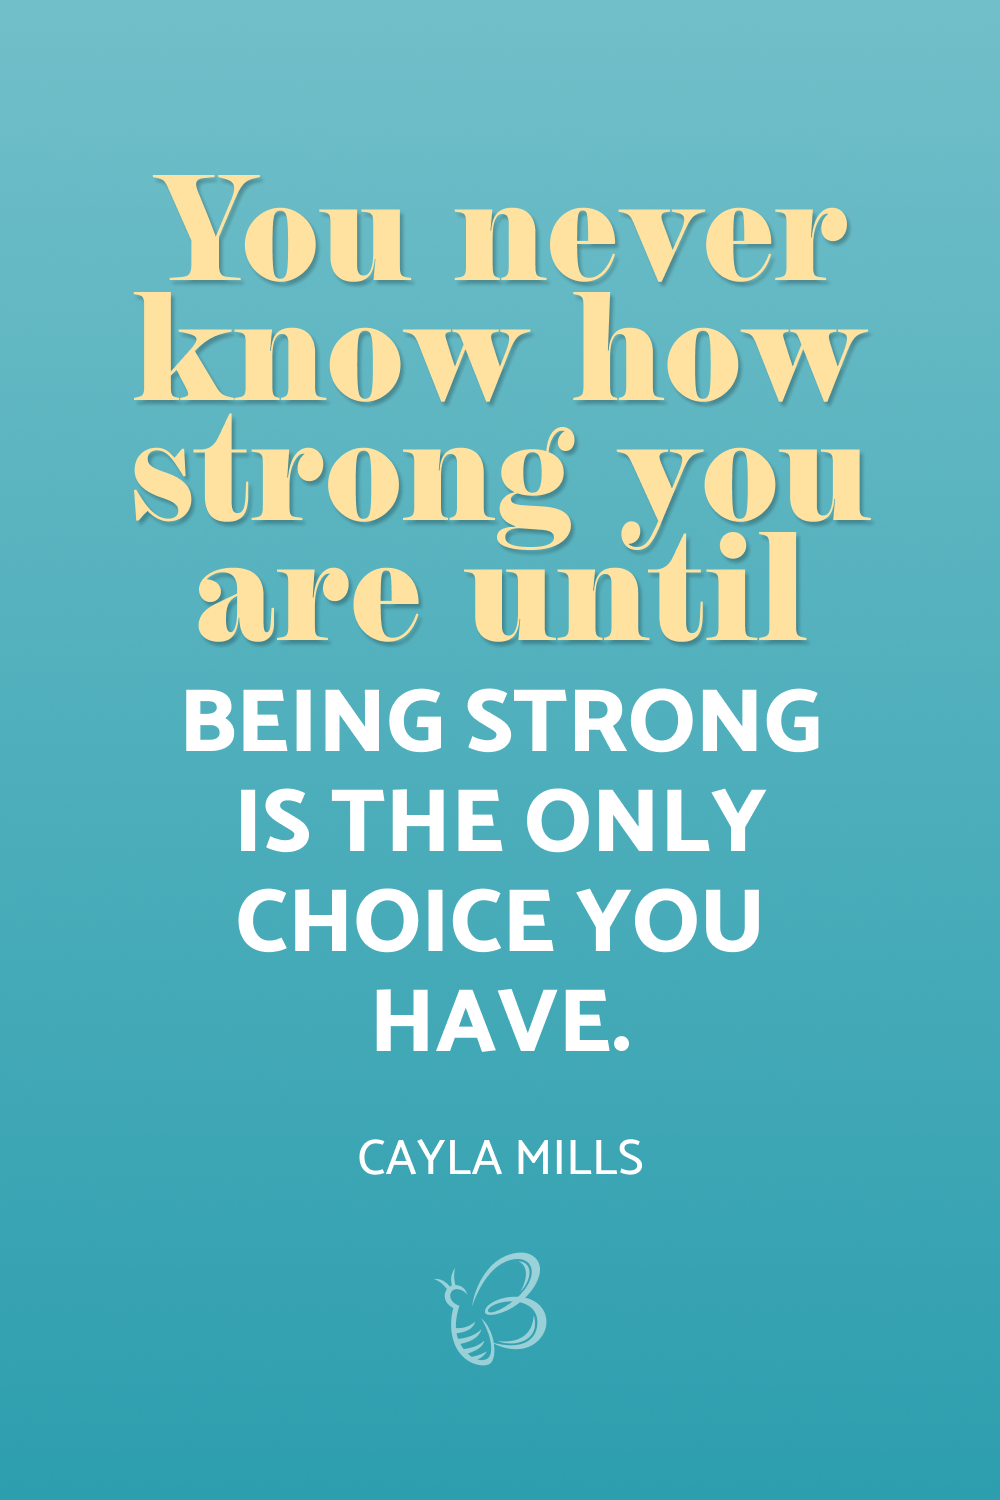 You never know how strong you are until being strong is the only choice you have – Cayla Mills